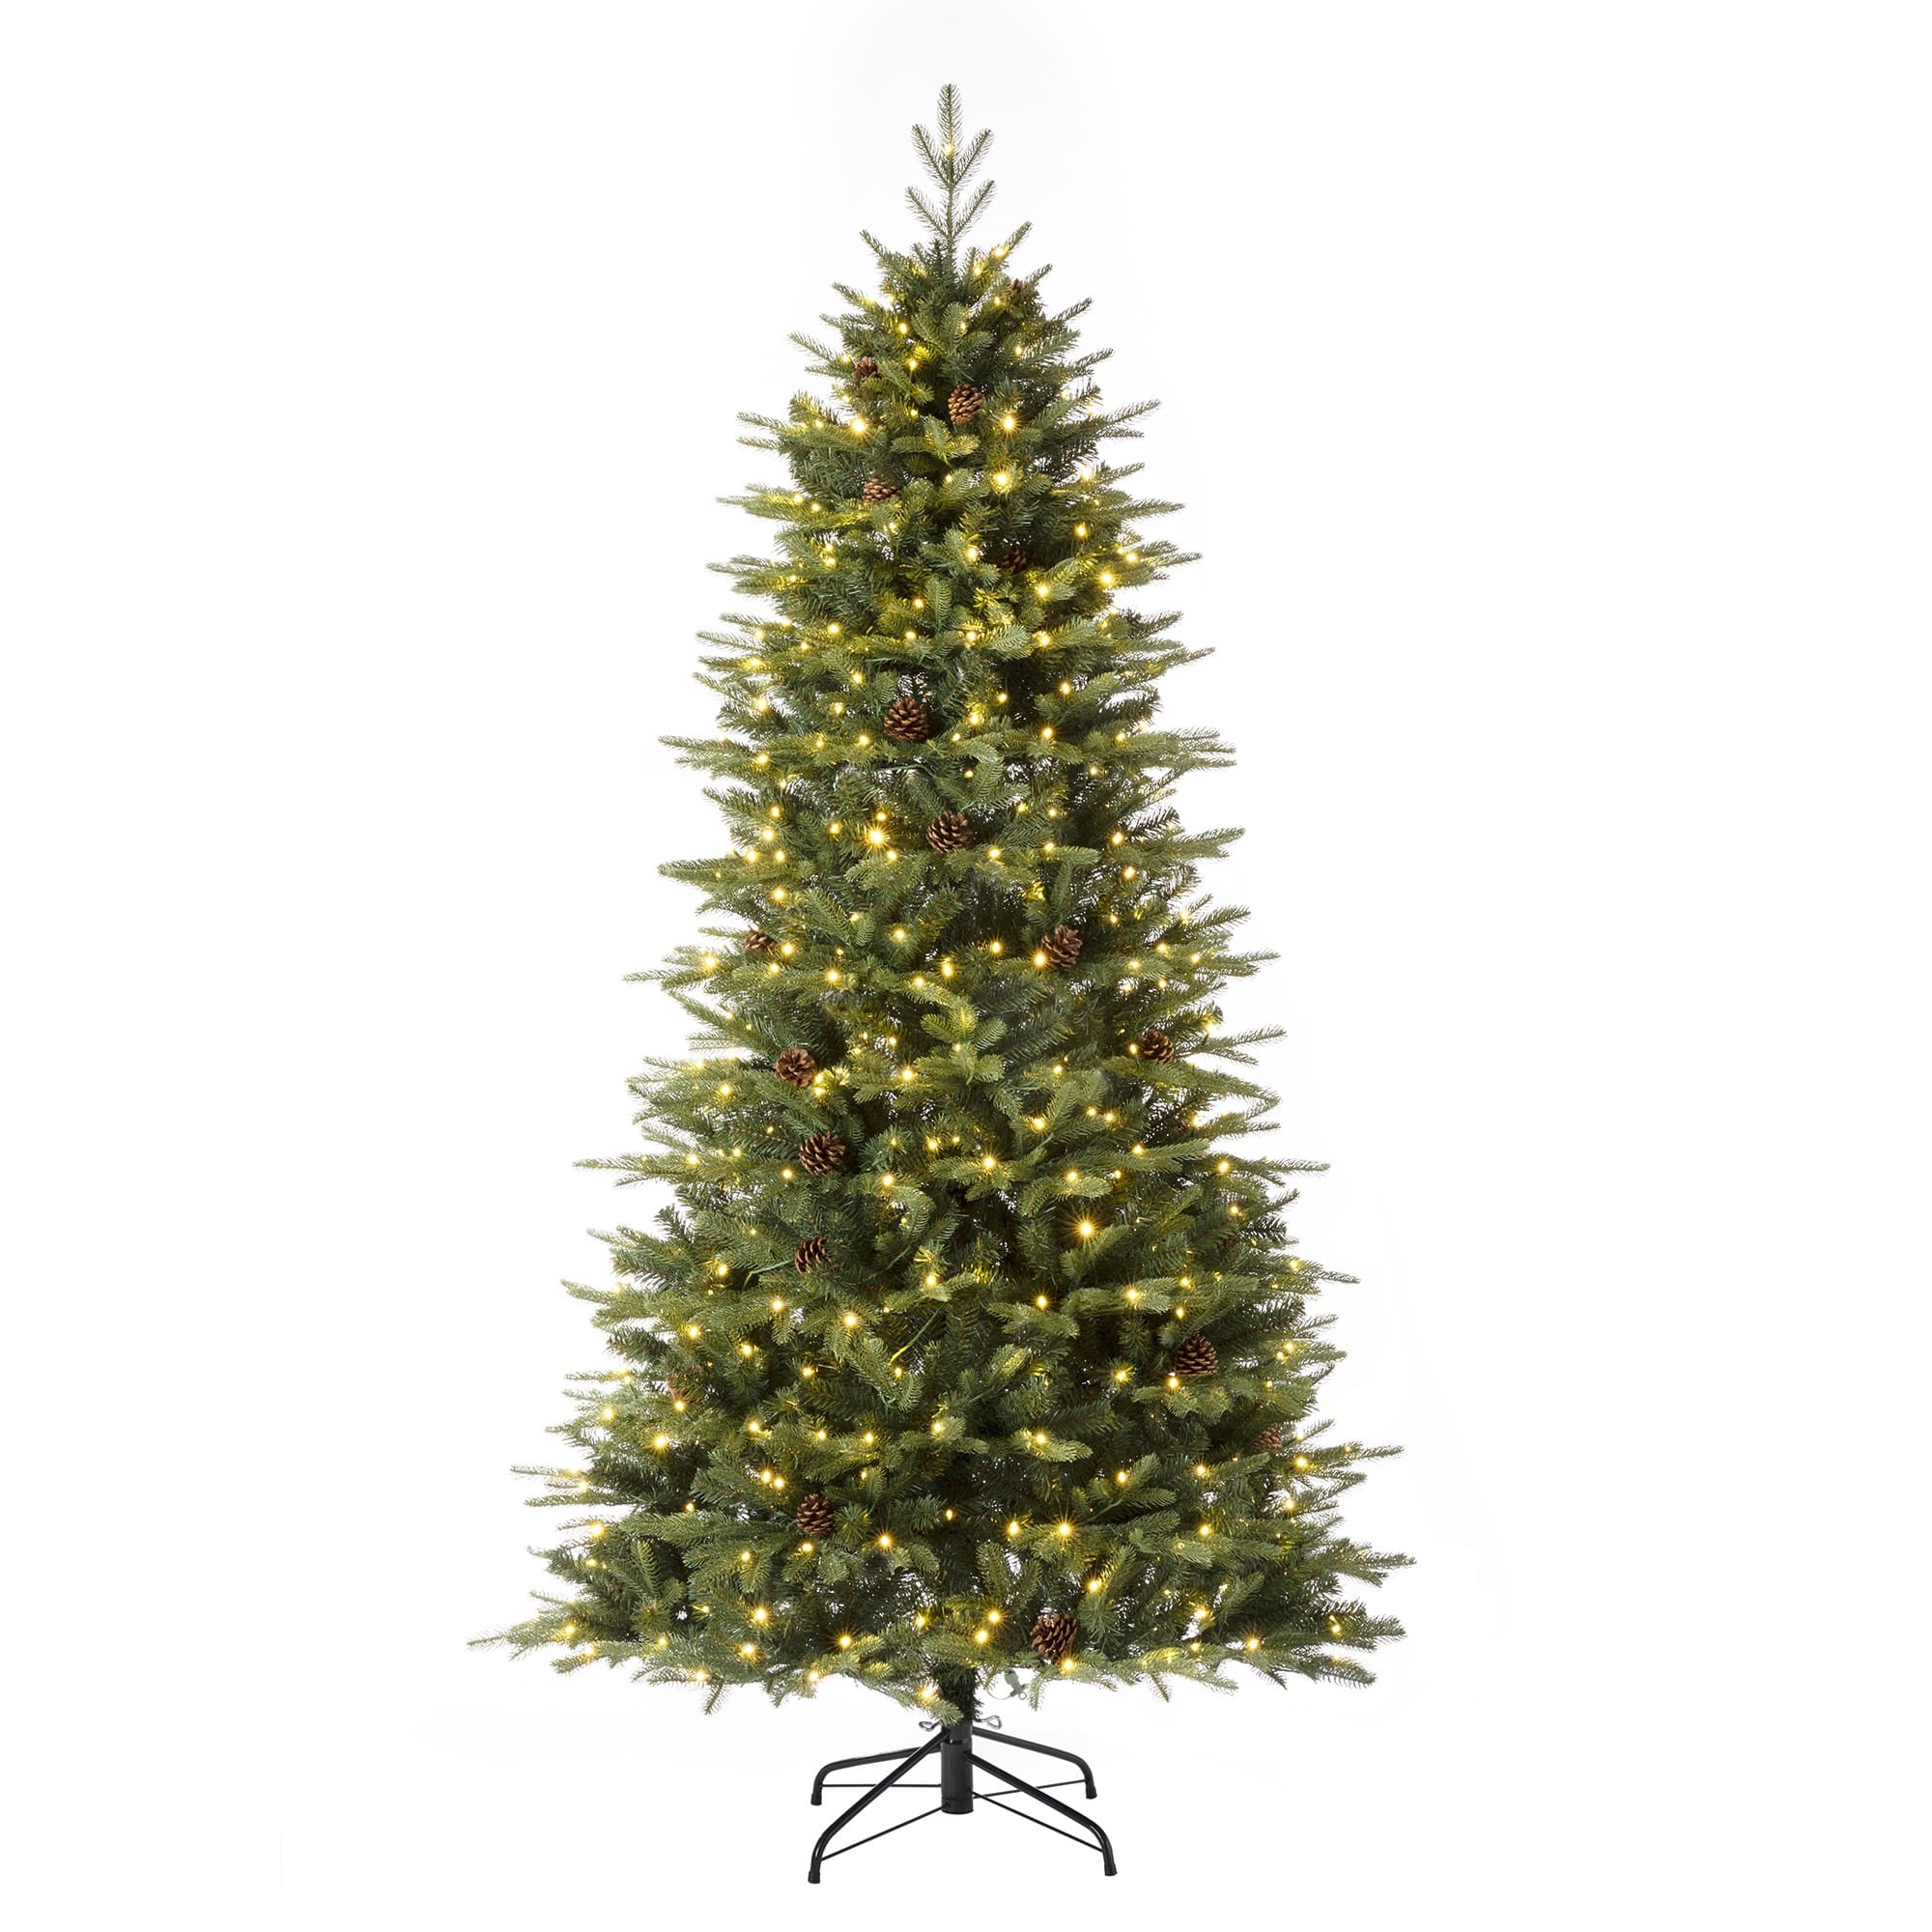 7ft. Pre-Lit Fir Artificial Christmas Tree, Color Changing LED Lights